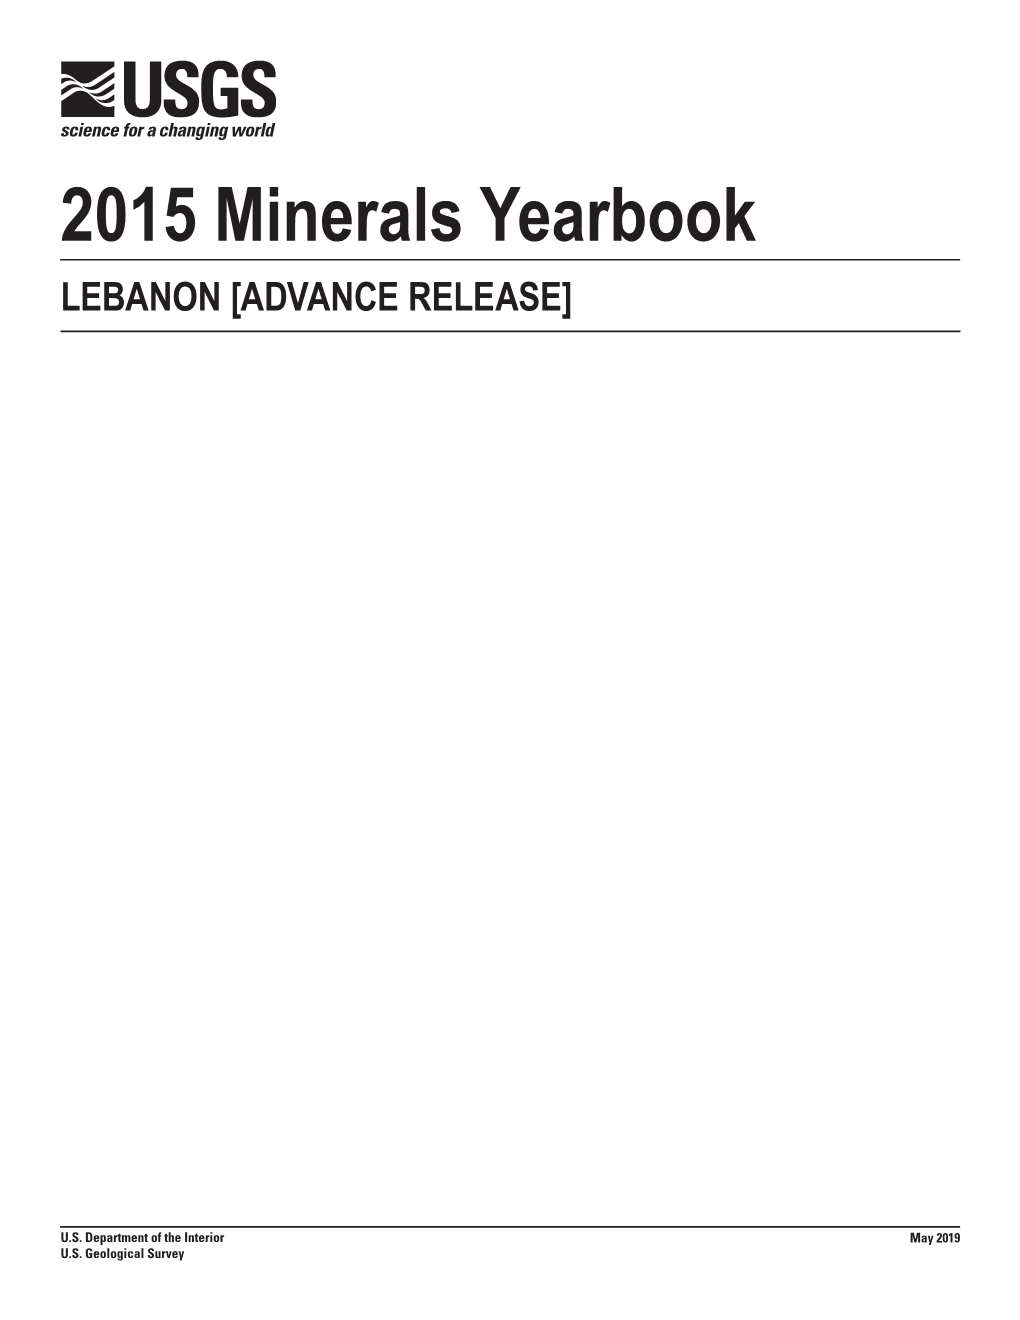 The Mineral Industry of Lebanon in 2015